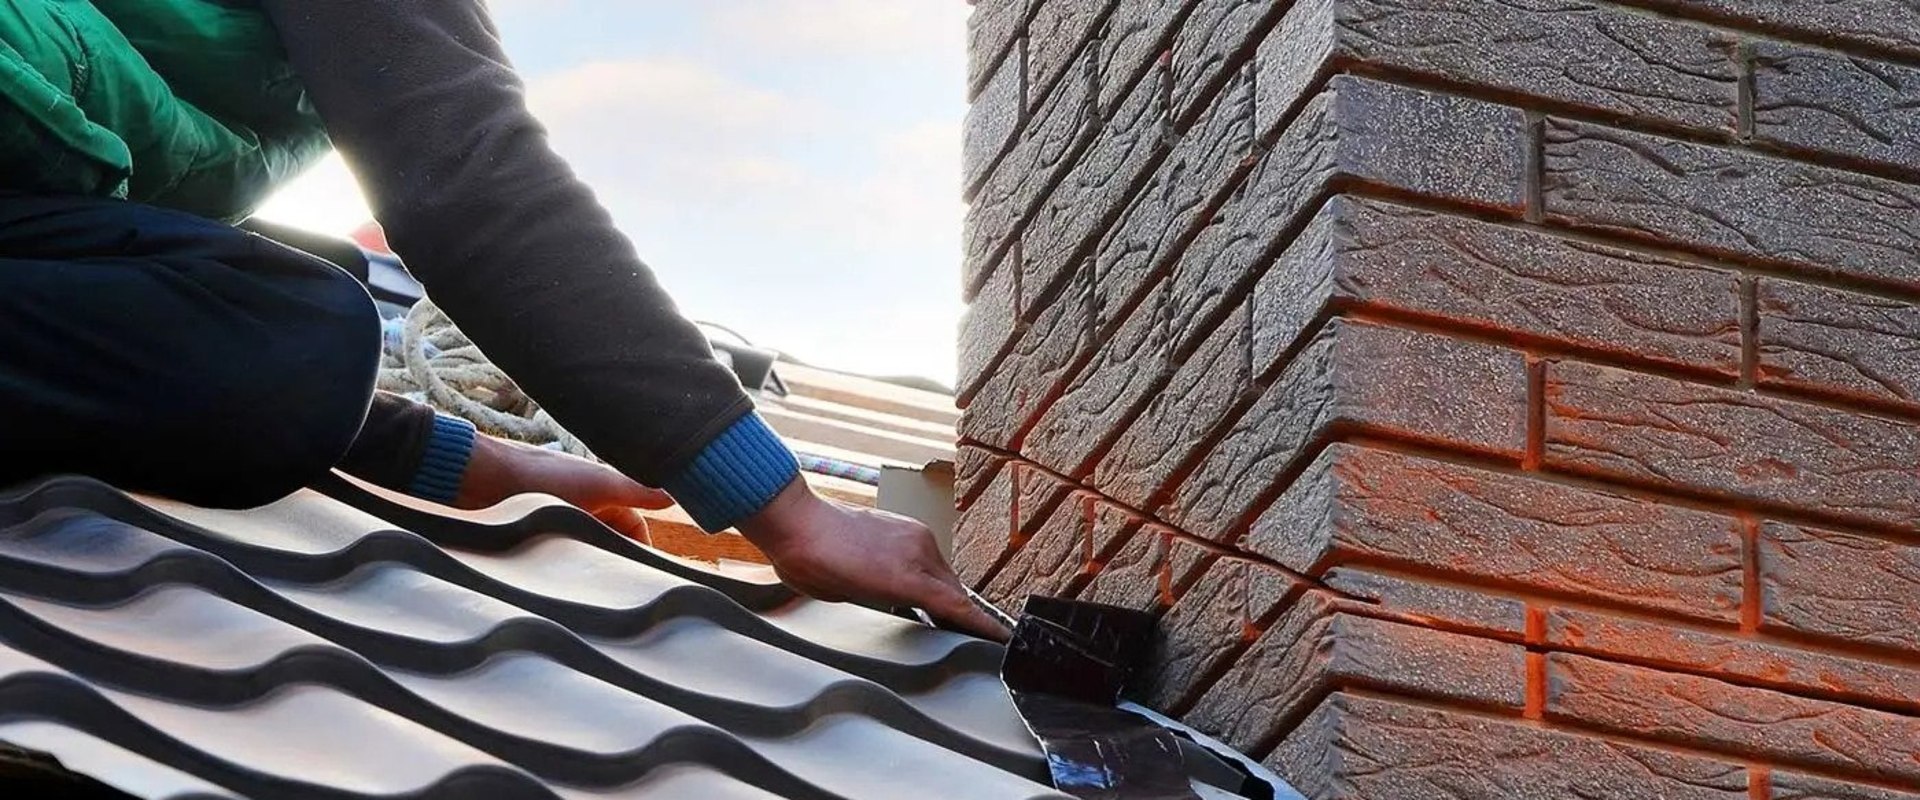 How to Fix Leaks on Roofs and Chimneys